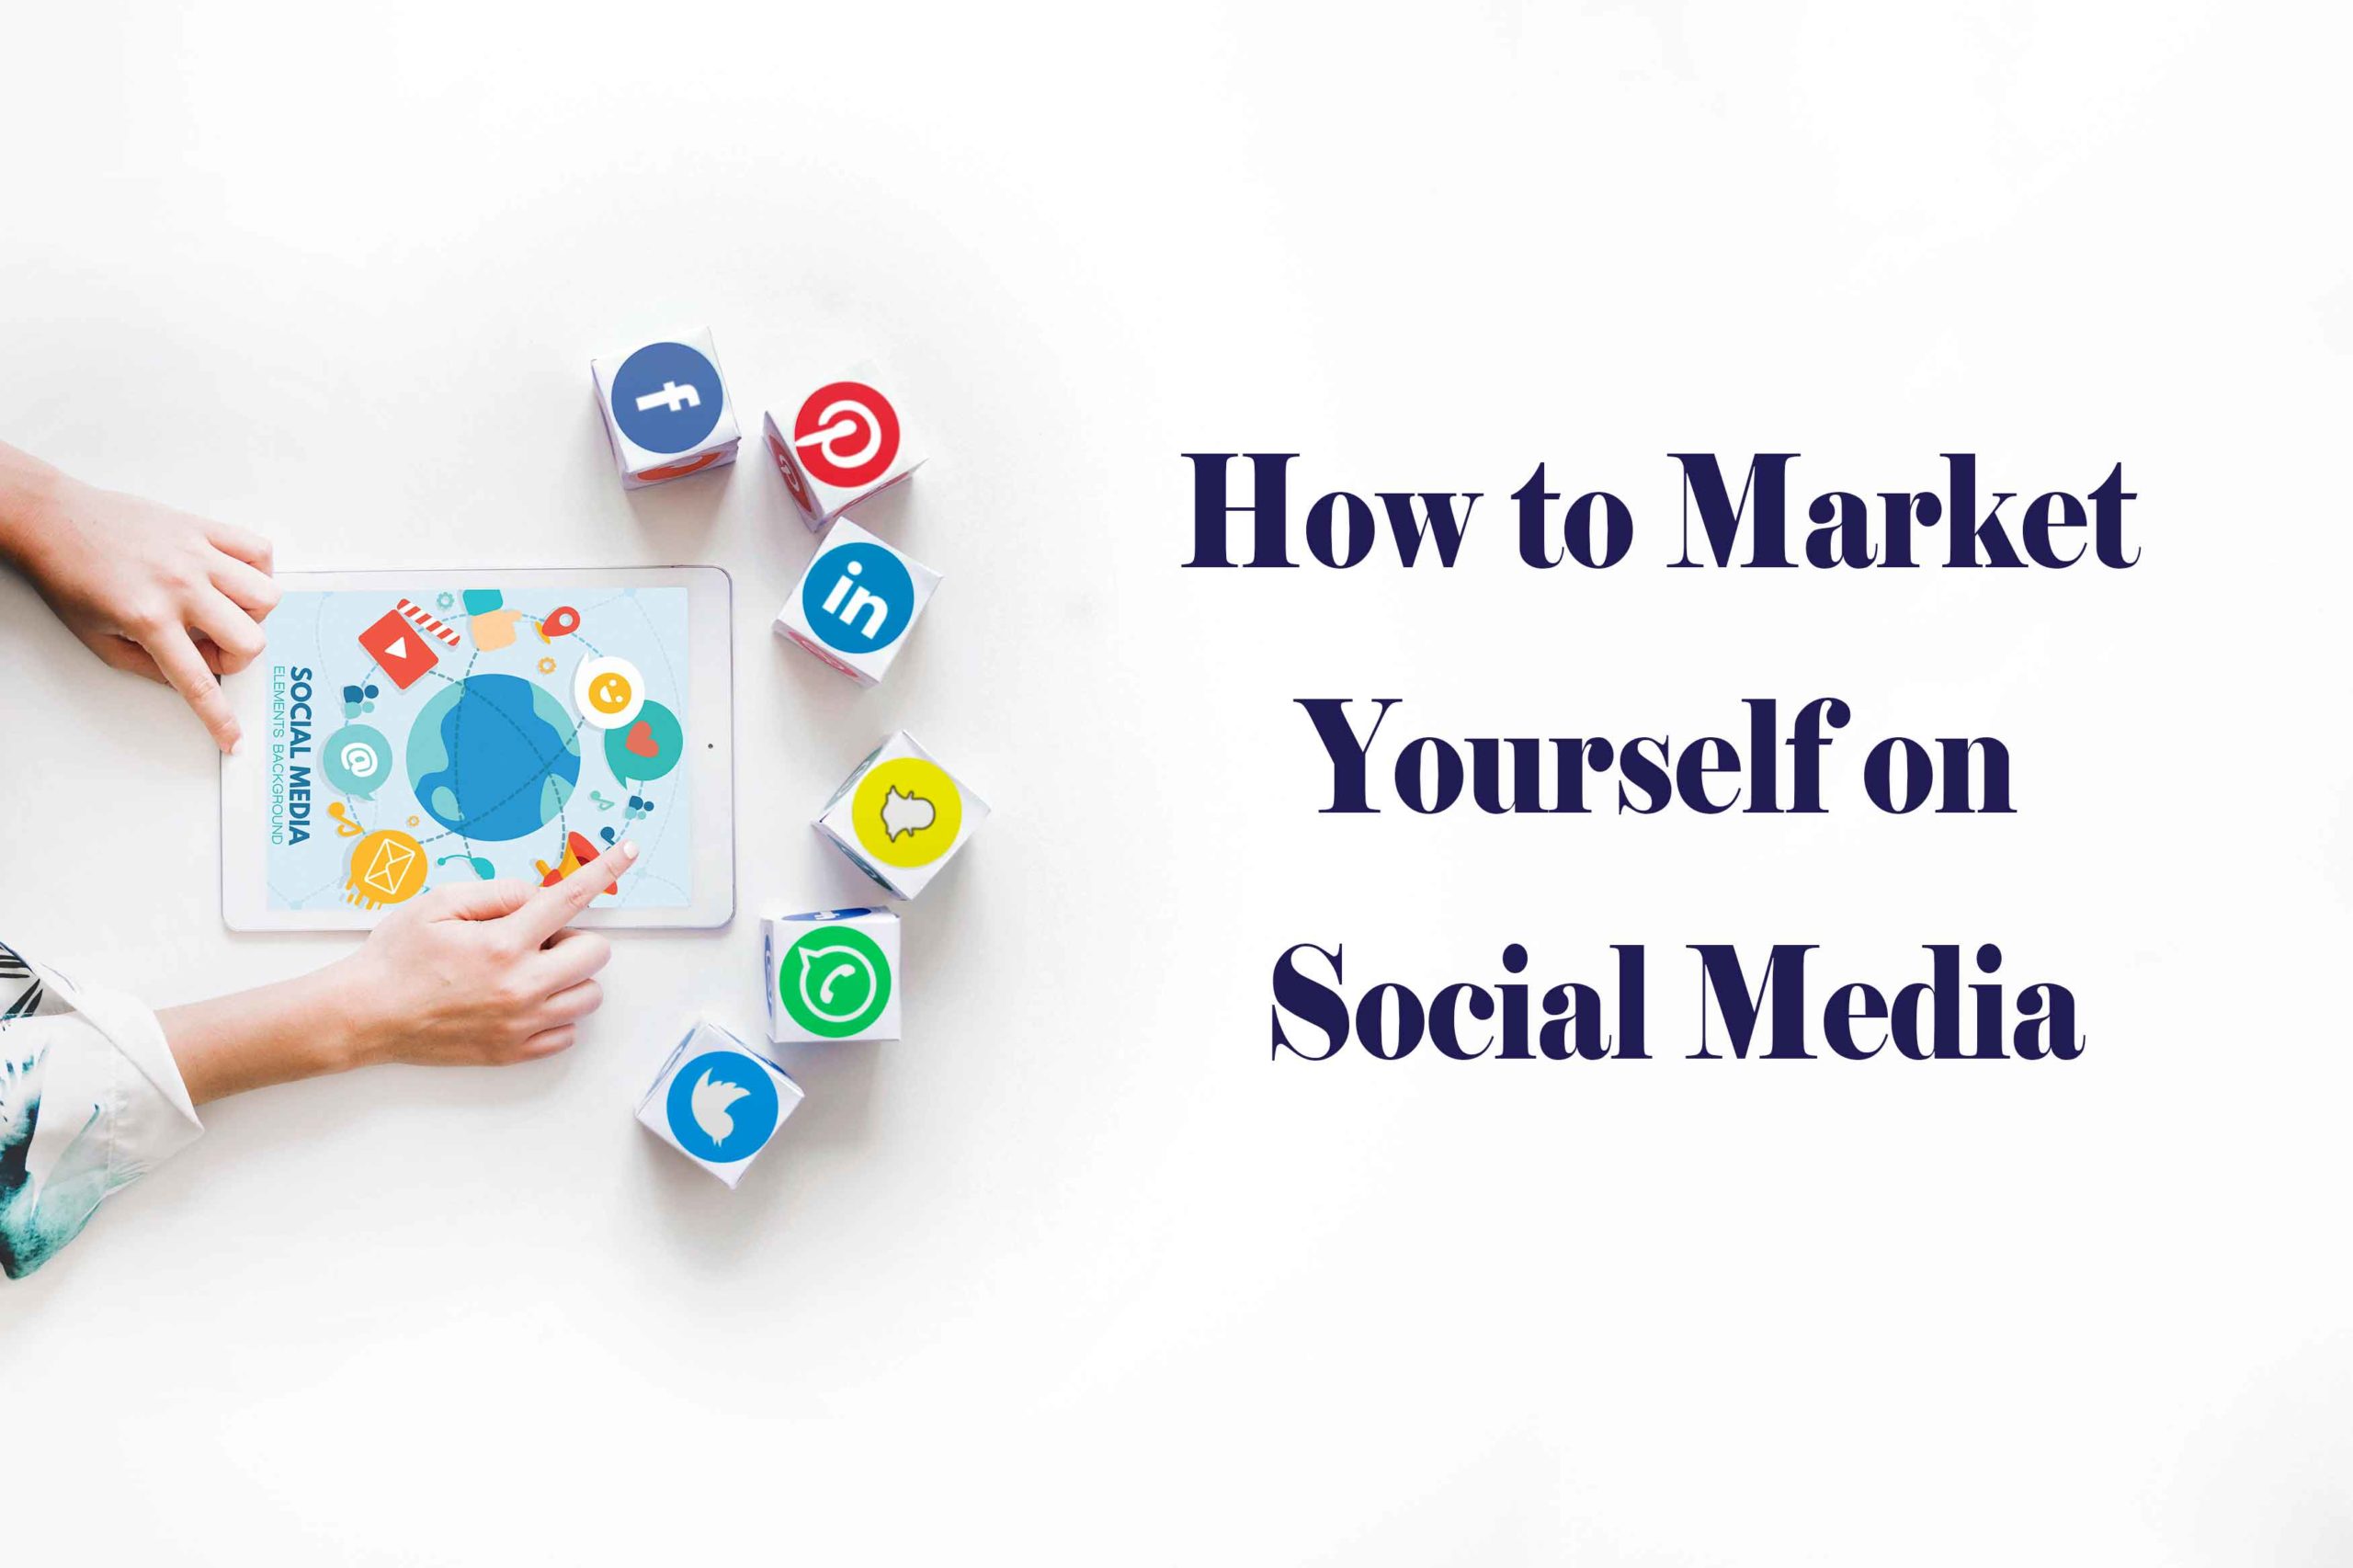 How to Market Yourself on Social Media